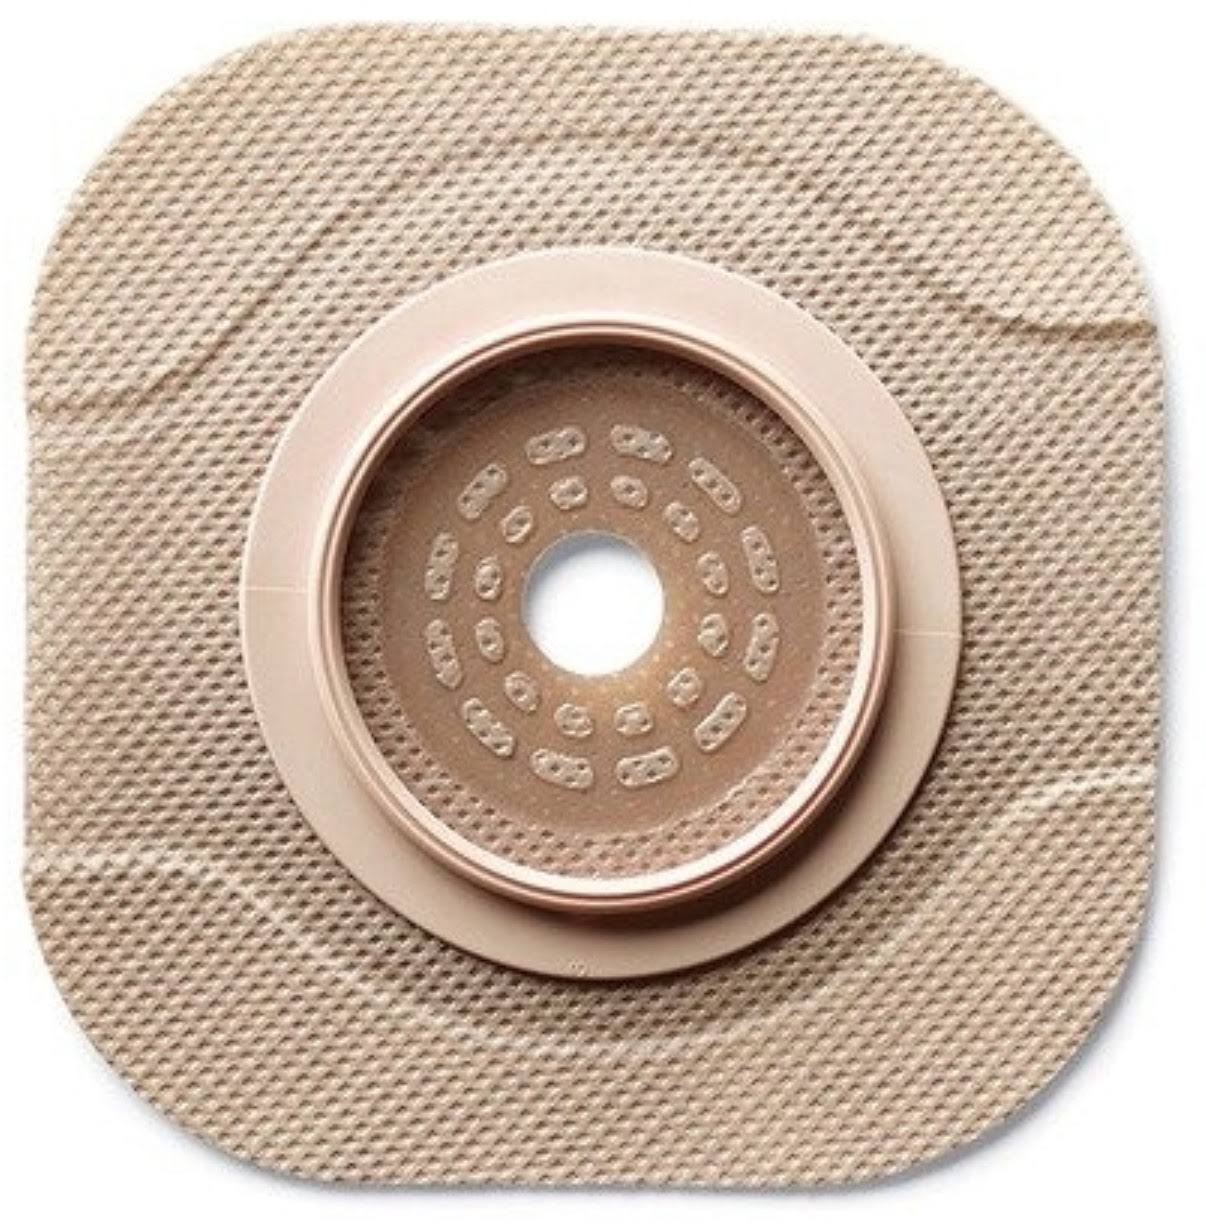 Hollister Skin Barrier, Up to 1 3/4 Inch Stoma Opening, 5 Count